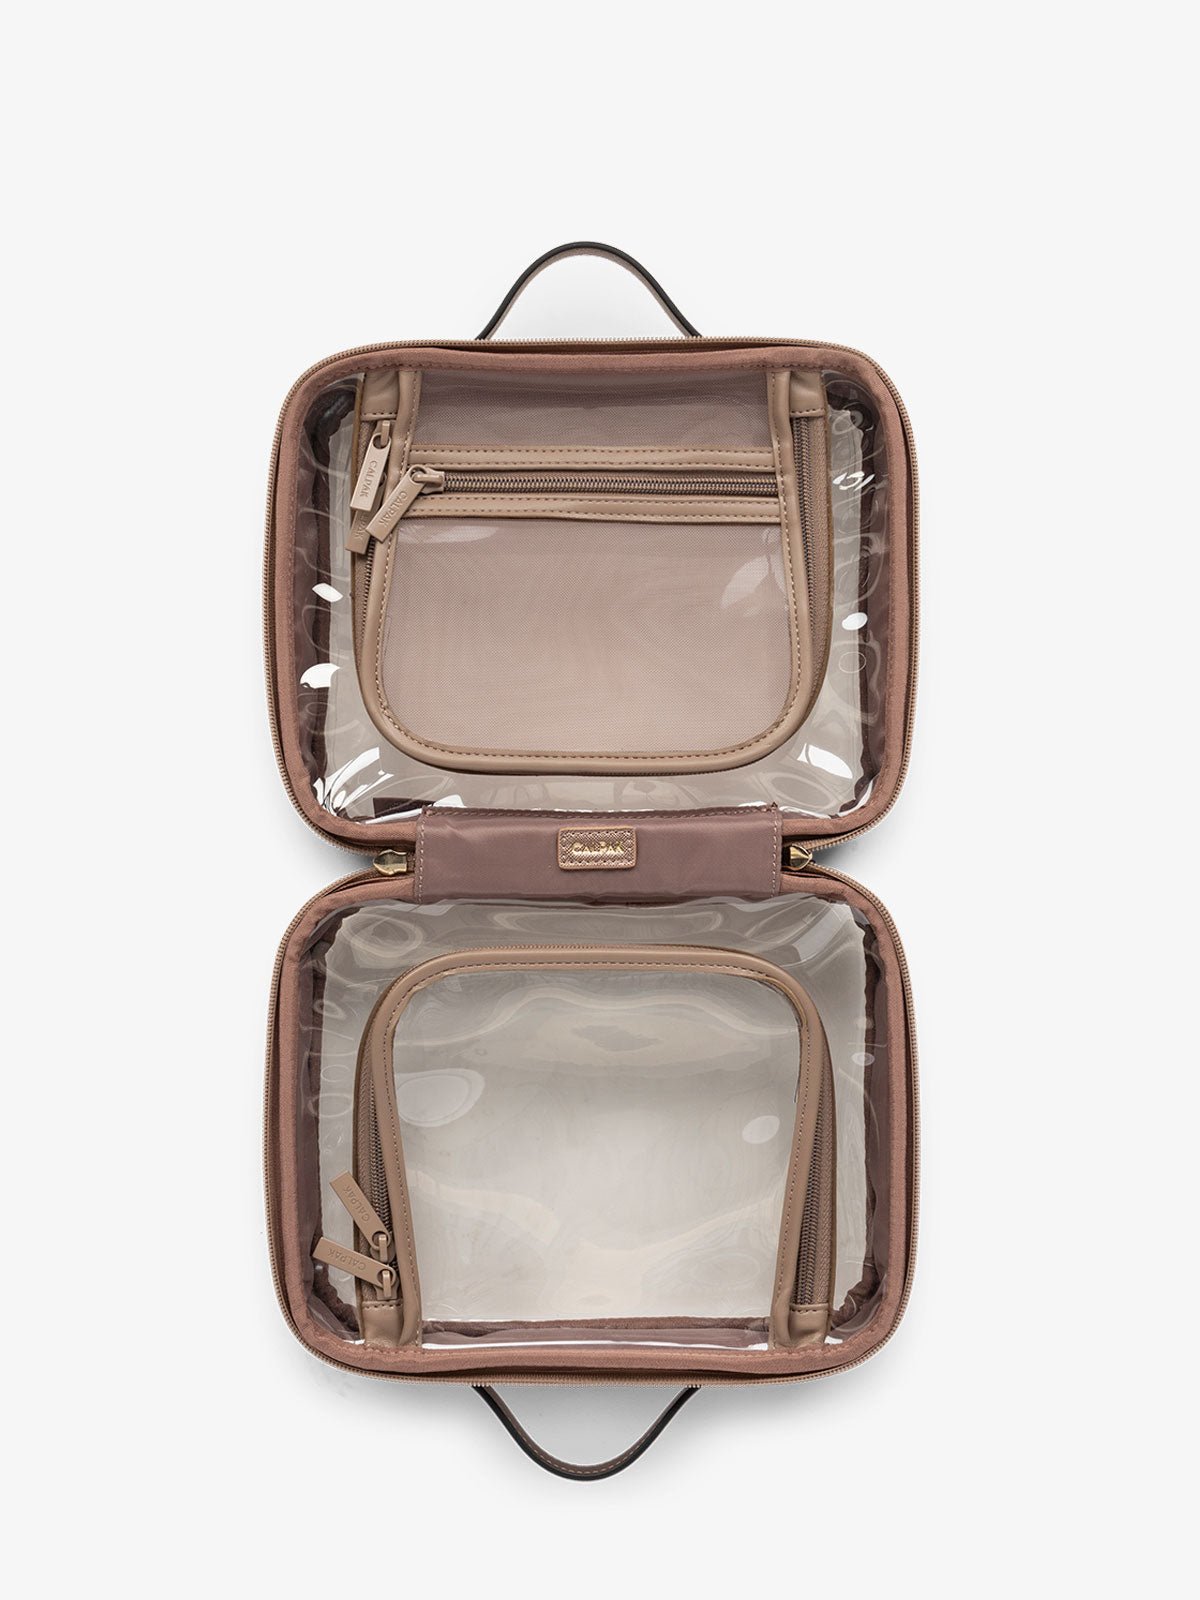 CALPAK clear travel makeup bag with zipper enclosed compartments in shiny bronze